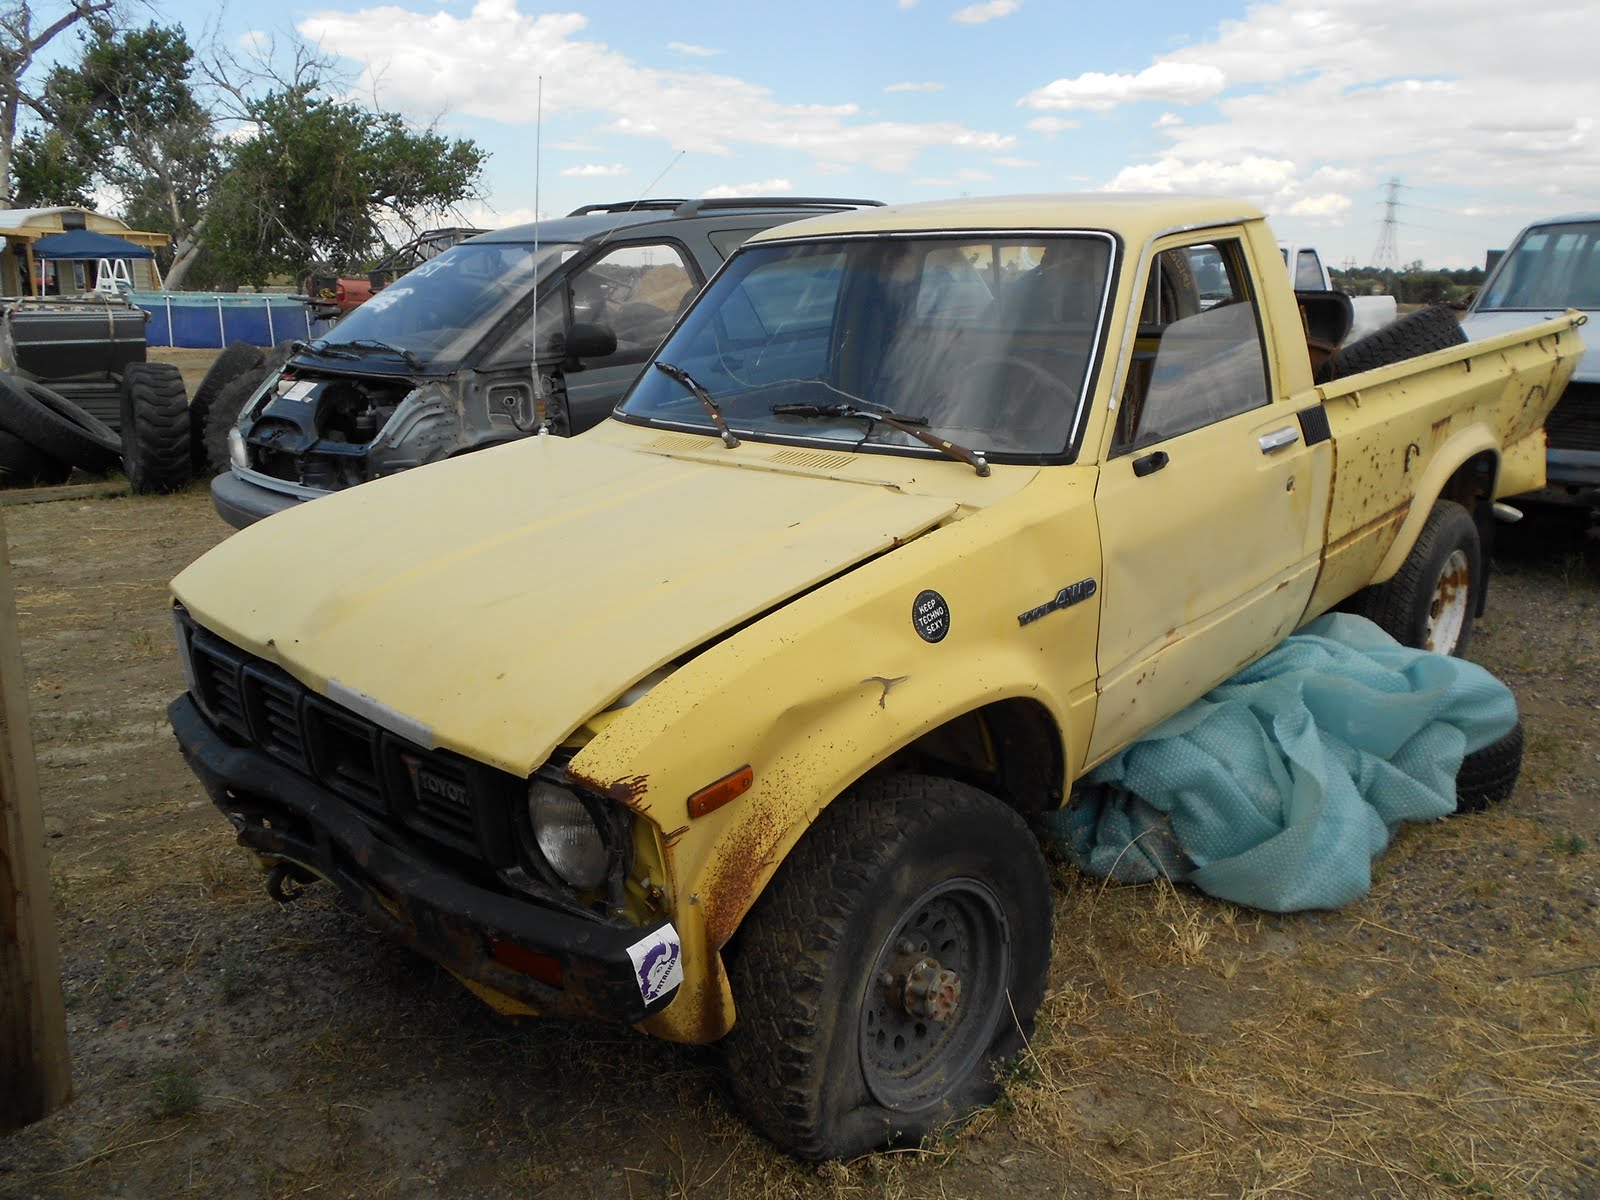 New Arrivals at Jim's Used Toyota Truck Parts: 1981 Toyota Pickup 4x4